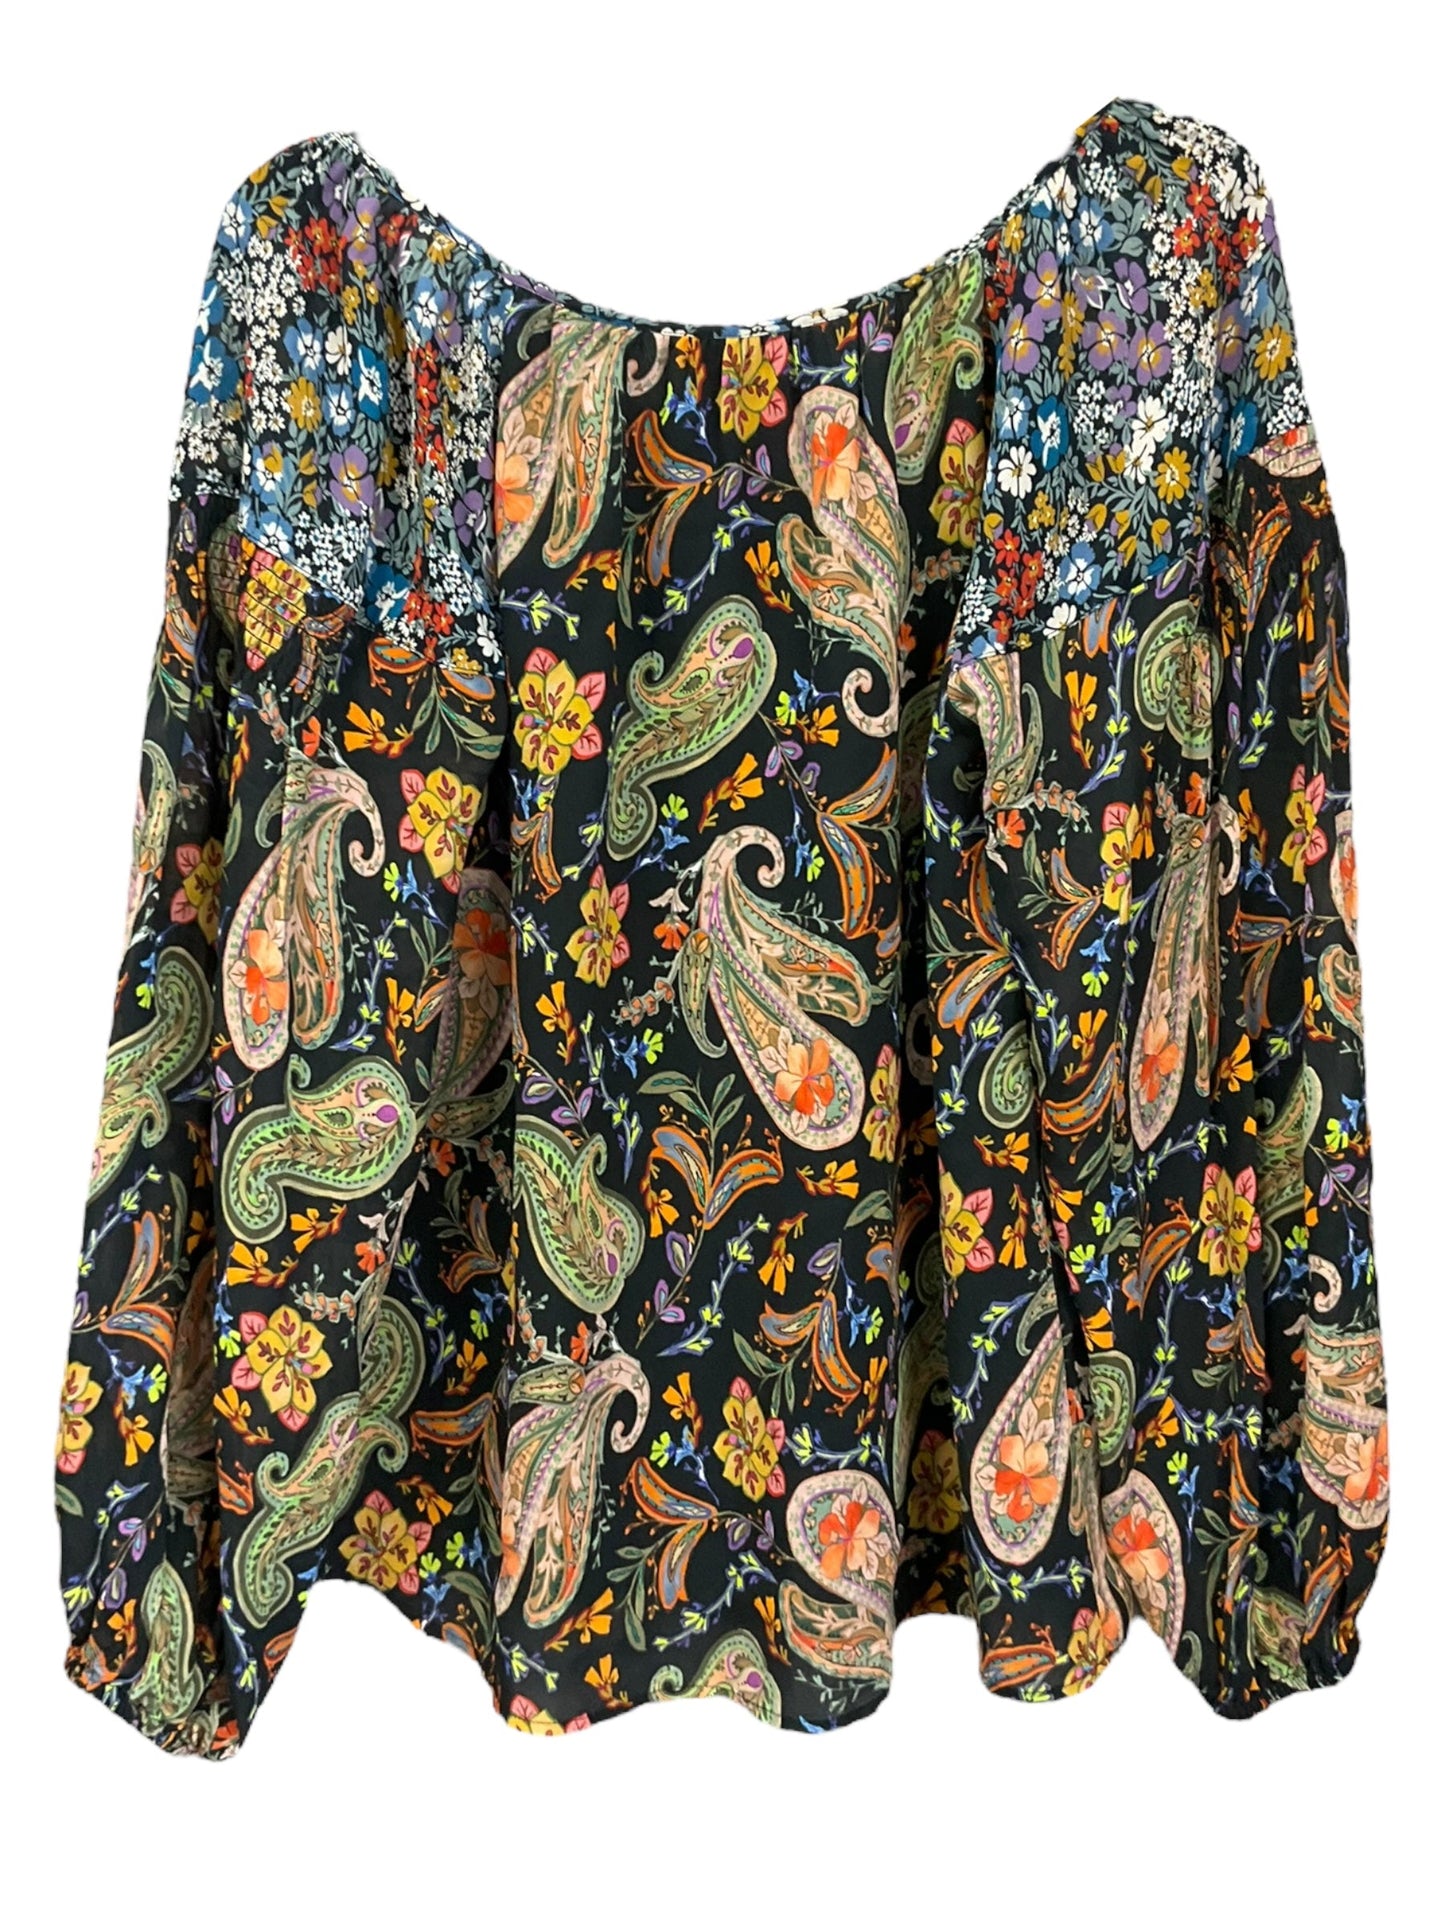 Floral Print Top Long Sleeve Johnny Was, Size S